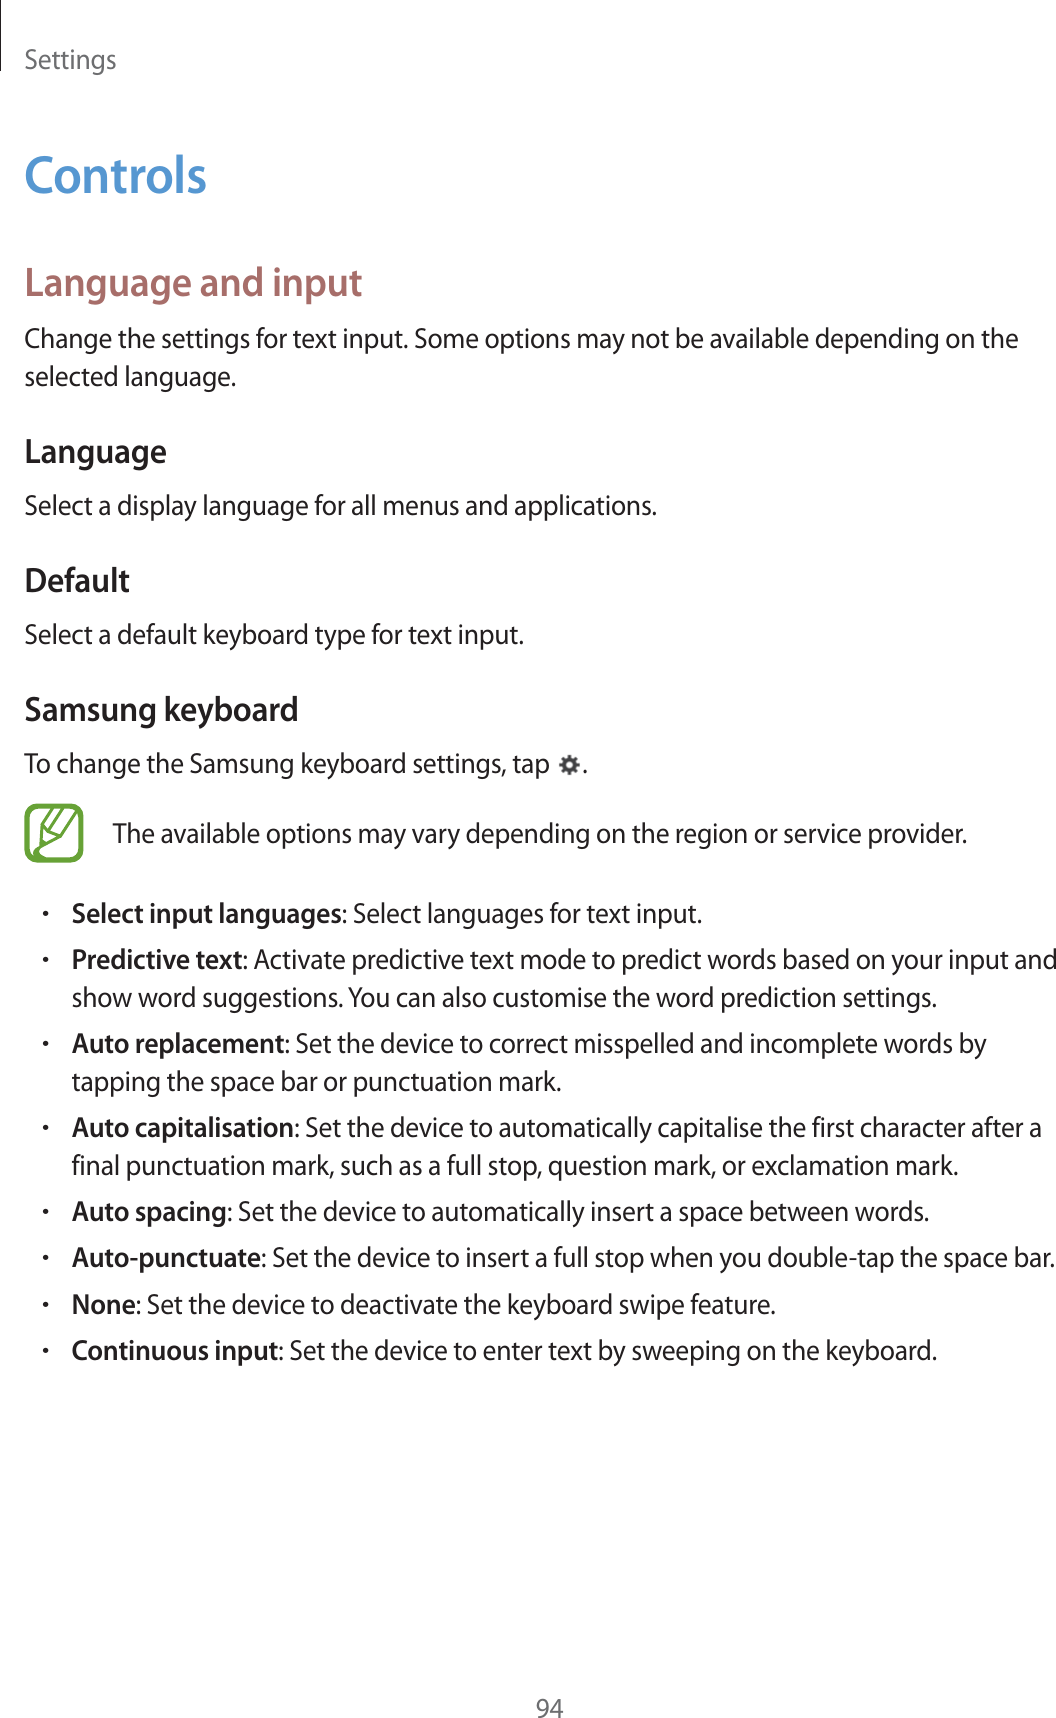 Settings94ControlsLanguage and inputChange the settings for text input. Some options may not be available depending on the selected language.LanguageSelect a display language for all menus and applications.DefaultSelect a default keyboard type for text input.Samsung keyboardTo change the Samsung keyboard settings, tap  .The available options may vary depending on the region or service provider.rSelect input languages: Select languages for text input.rPredictive text: Activate predictive text mode to predict words based on your input and show word suggestions. You can also customise the word prediction settings.rAuto replacement: Set the device to correct misspelled and incomplete words by tapping the space bar or punctuation mark.rAuto capitalisation: Set the device to automatically capitalise the first character after a final punctuation mark, such as a full stop, question mark, or exclamation mark.rAuto spacing: Set the device to automatically insert a space between words.rAuto-punctuate: Set the device to insert a full stop when you double-tap the space bar.rNone: Set the device to deactivate the keyboard swipe feature.rContinuous input: Set the device to enter text by sweeping on the keyboard.